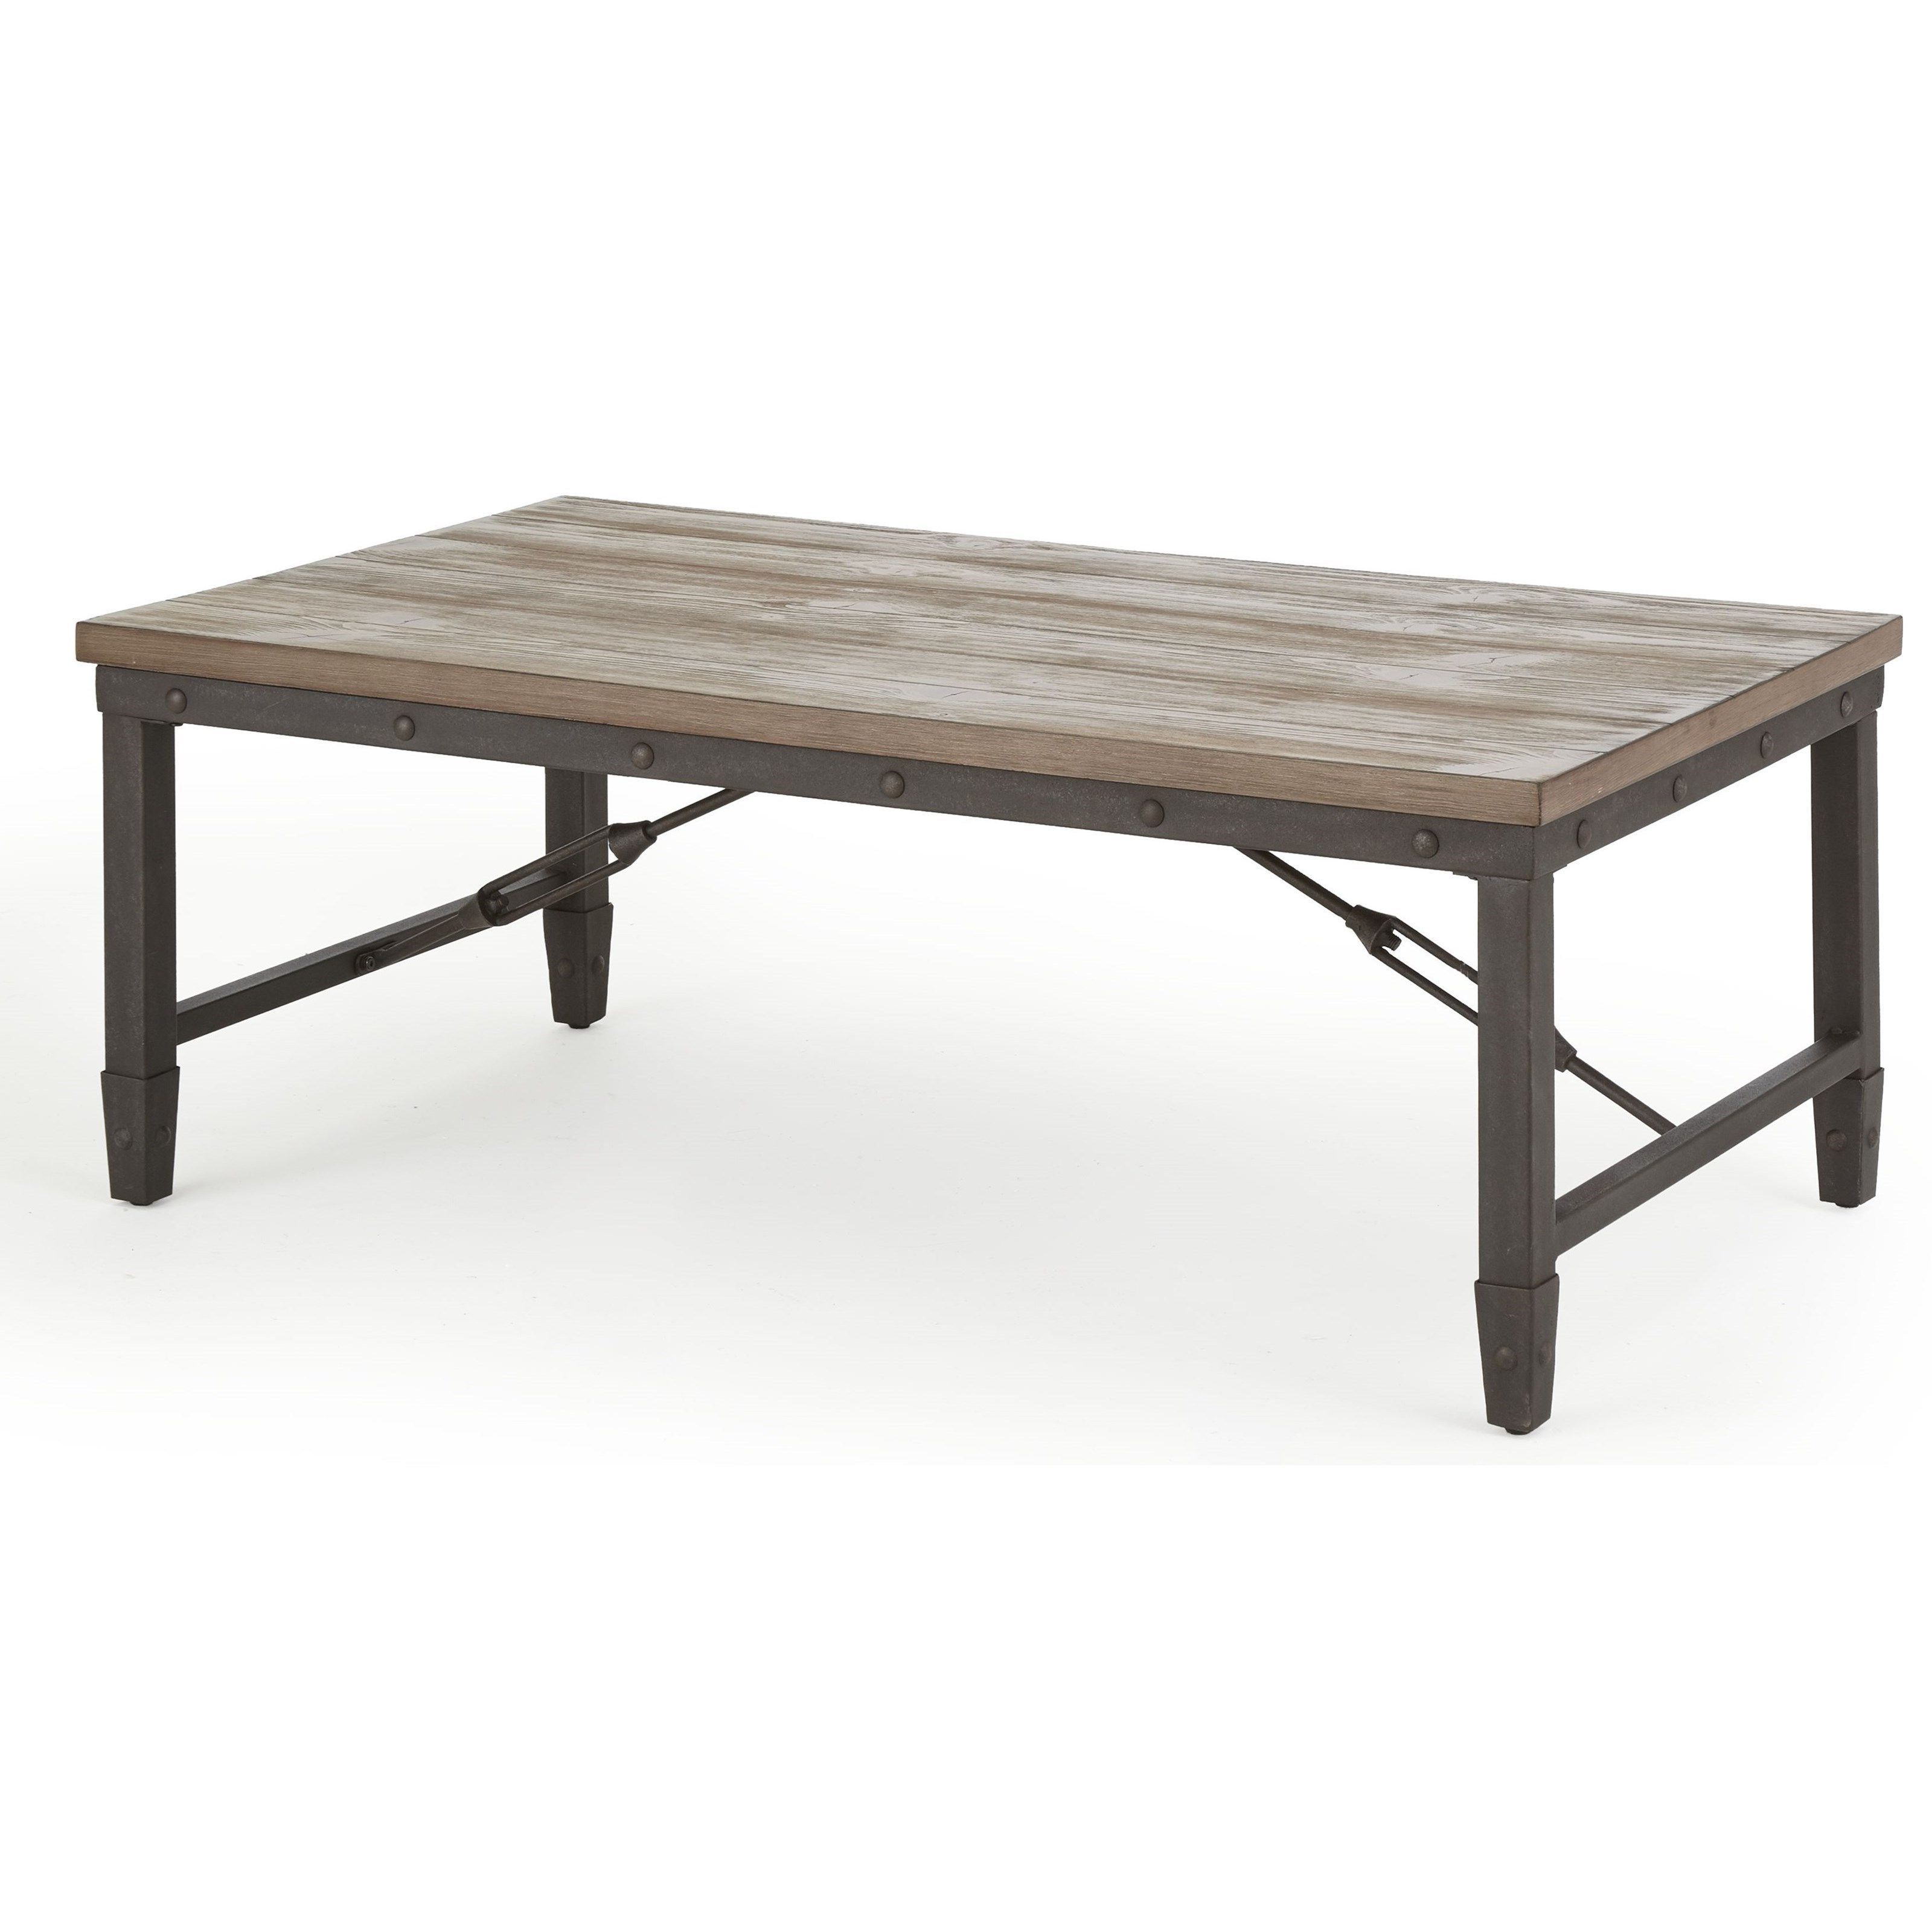 Jersey Industrial Cocktail Table With Iron Basevendor Throughout Current The Gray Barn O'quinn Weathered Bark And White Castered Cocktail Tables (View 14 of 20)